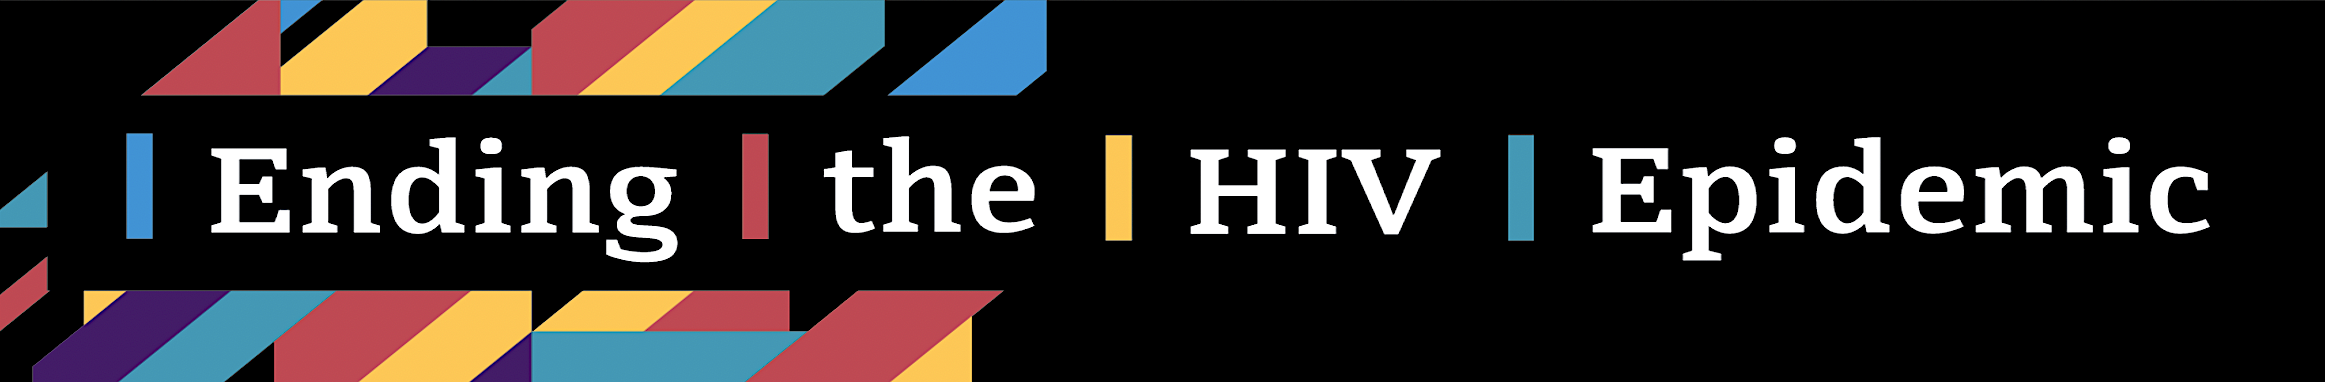 Ending the HIV Epidemic in King County